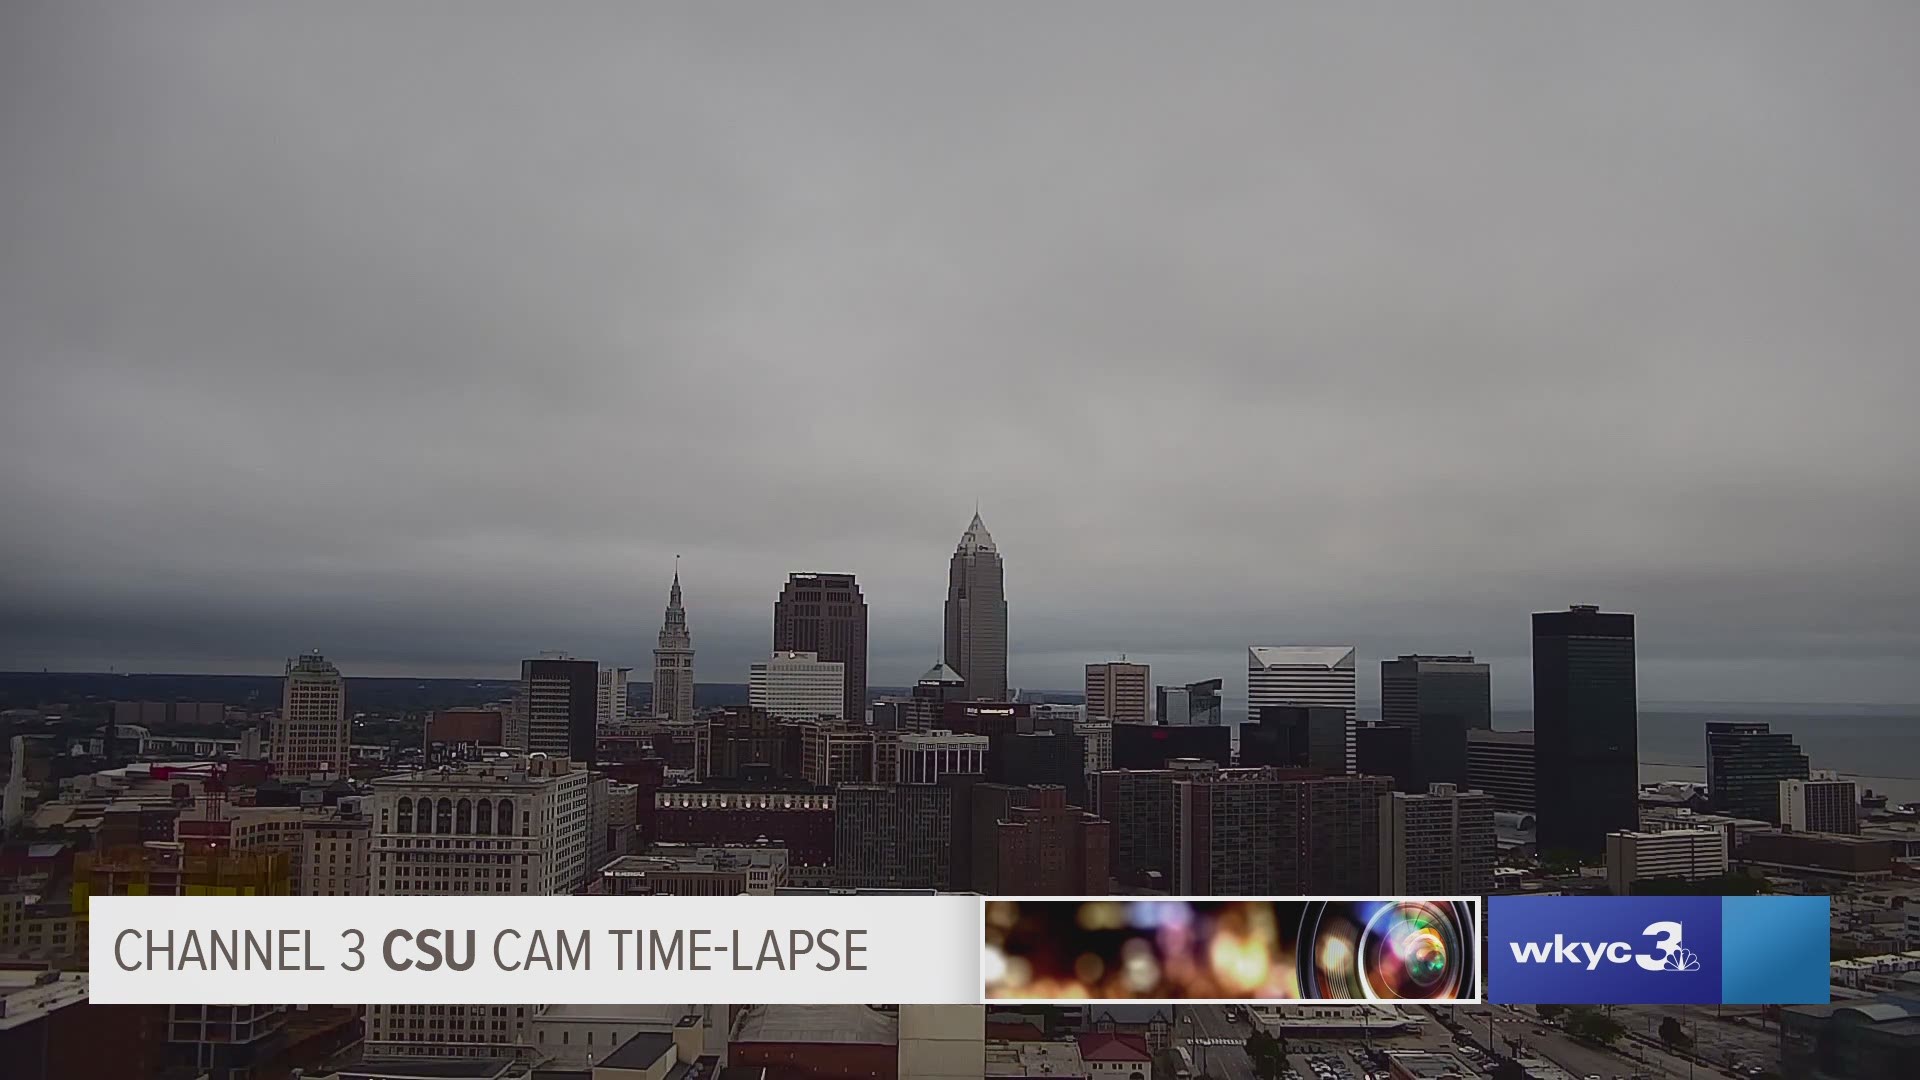 WATCH | No sunshine on our Channel 3 CSU Cam this evening (6/13/19) at sunset, but watch how the clouds dramatically change direction during the evening hours. #3weather